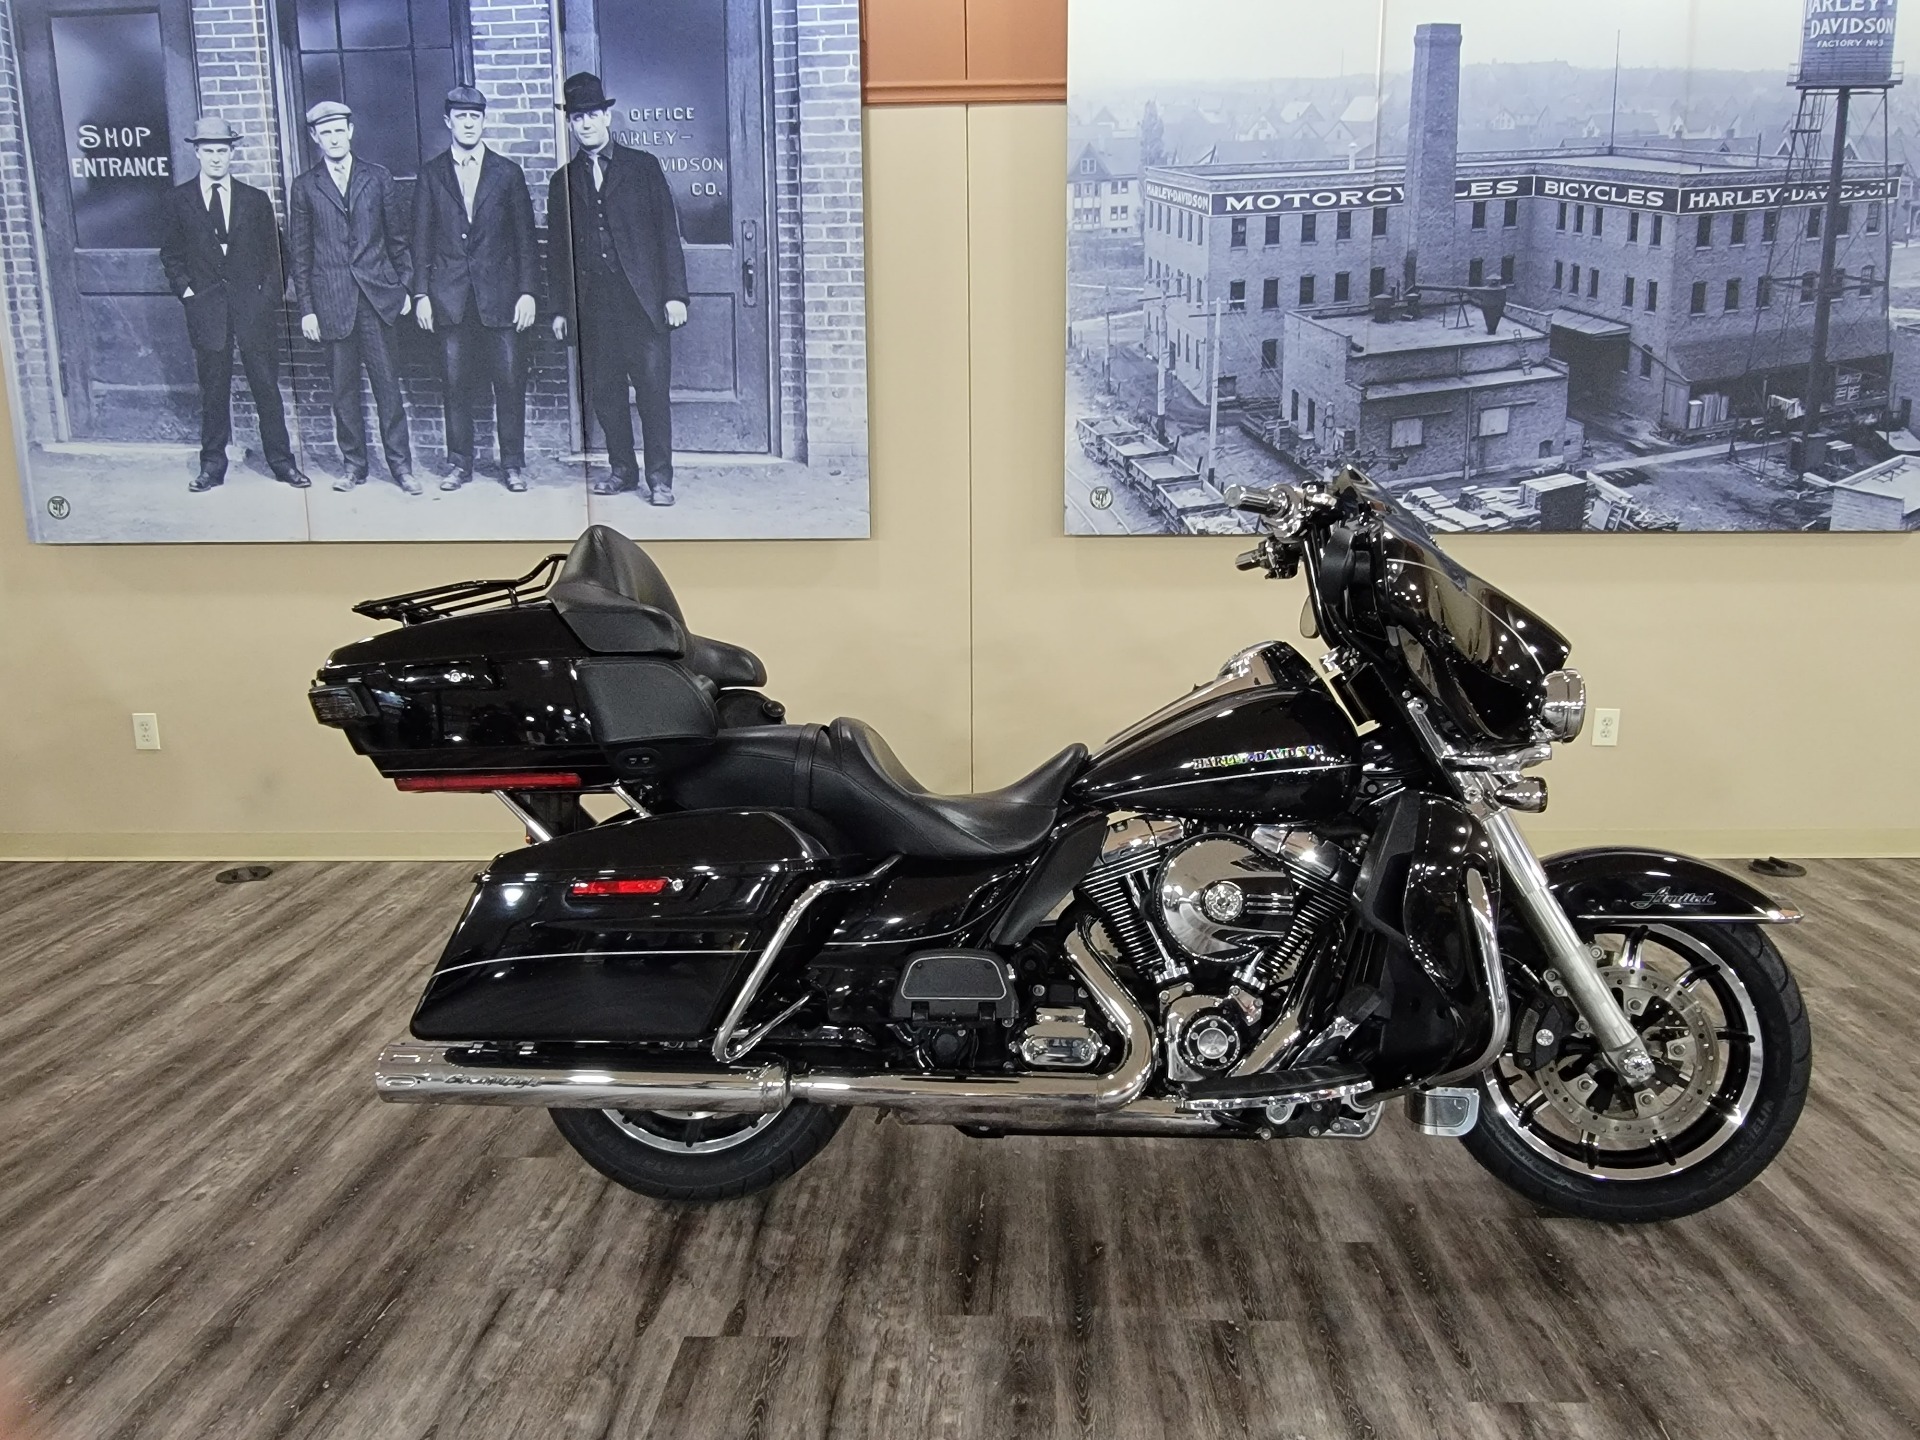 2015 Harley-Davidson Ultra Limited in Knoxville, Tennessee - Photo 1